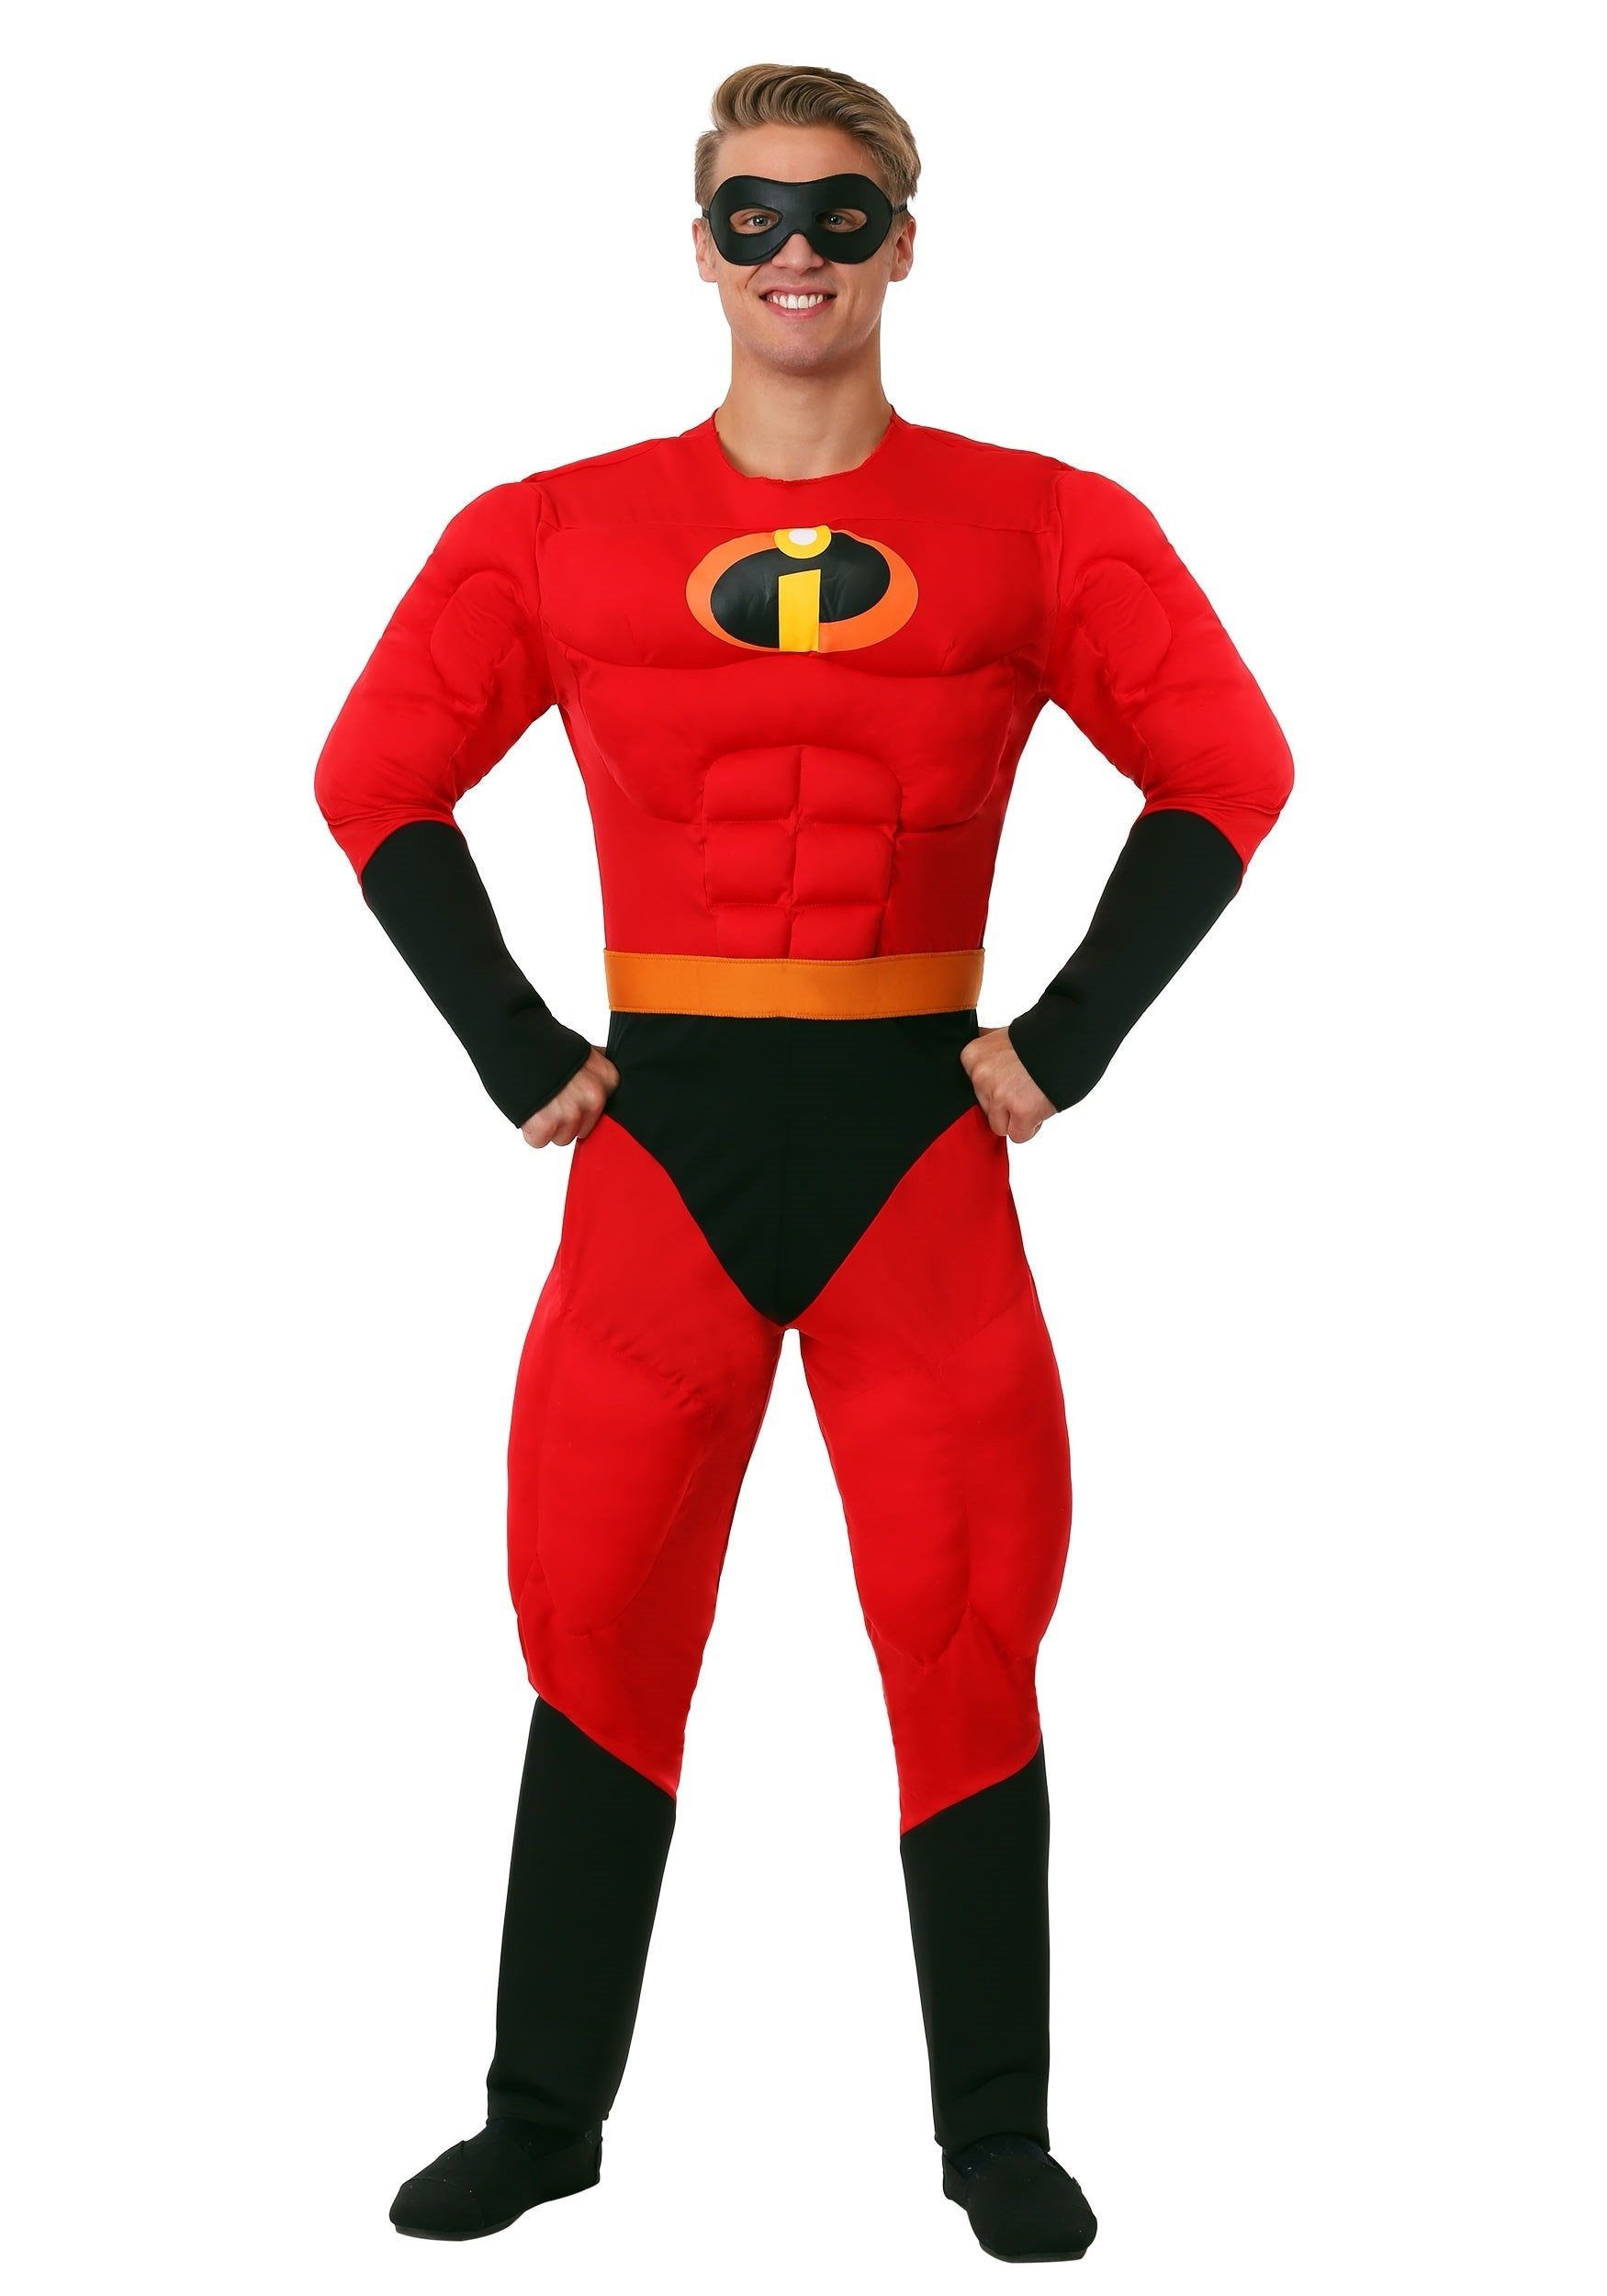 Disguise Men's Plus Size Mr. Incredible Deluxe Muscle Adult Costume, red, XXL (50-52)